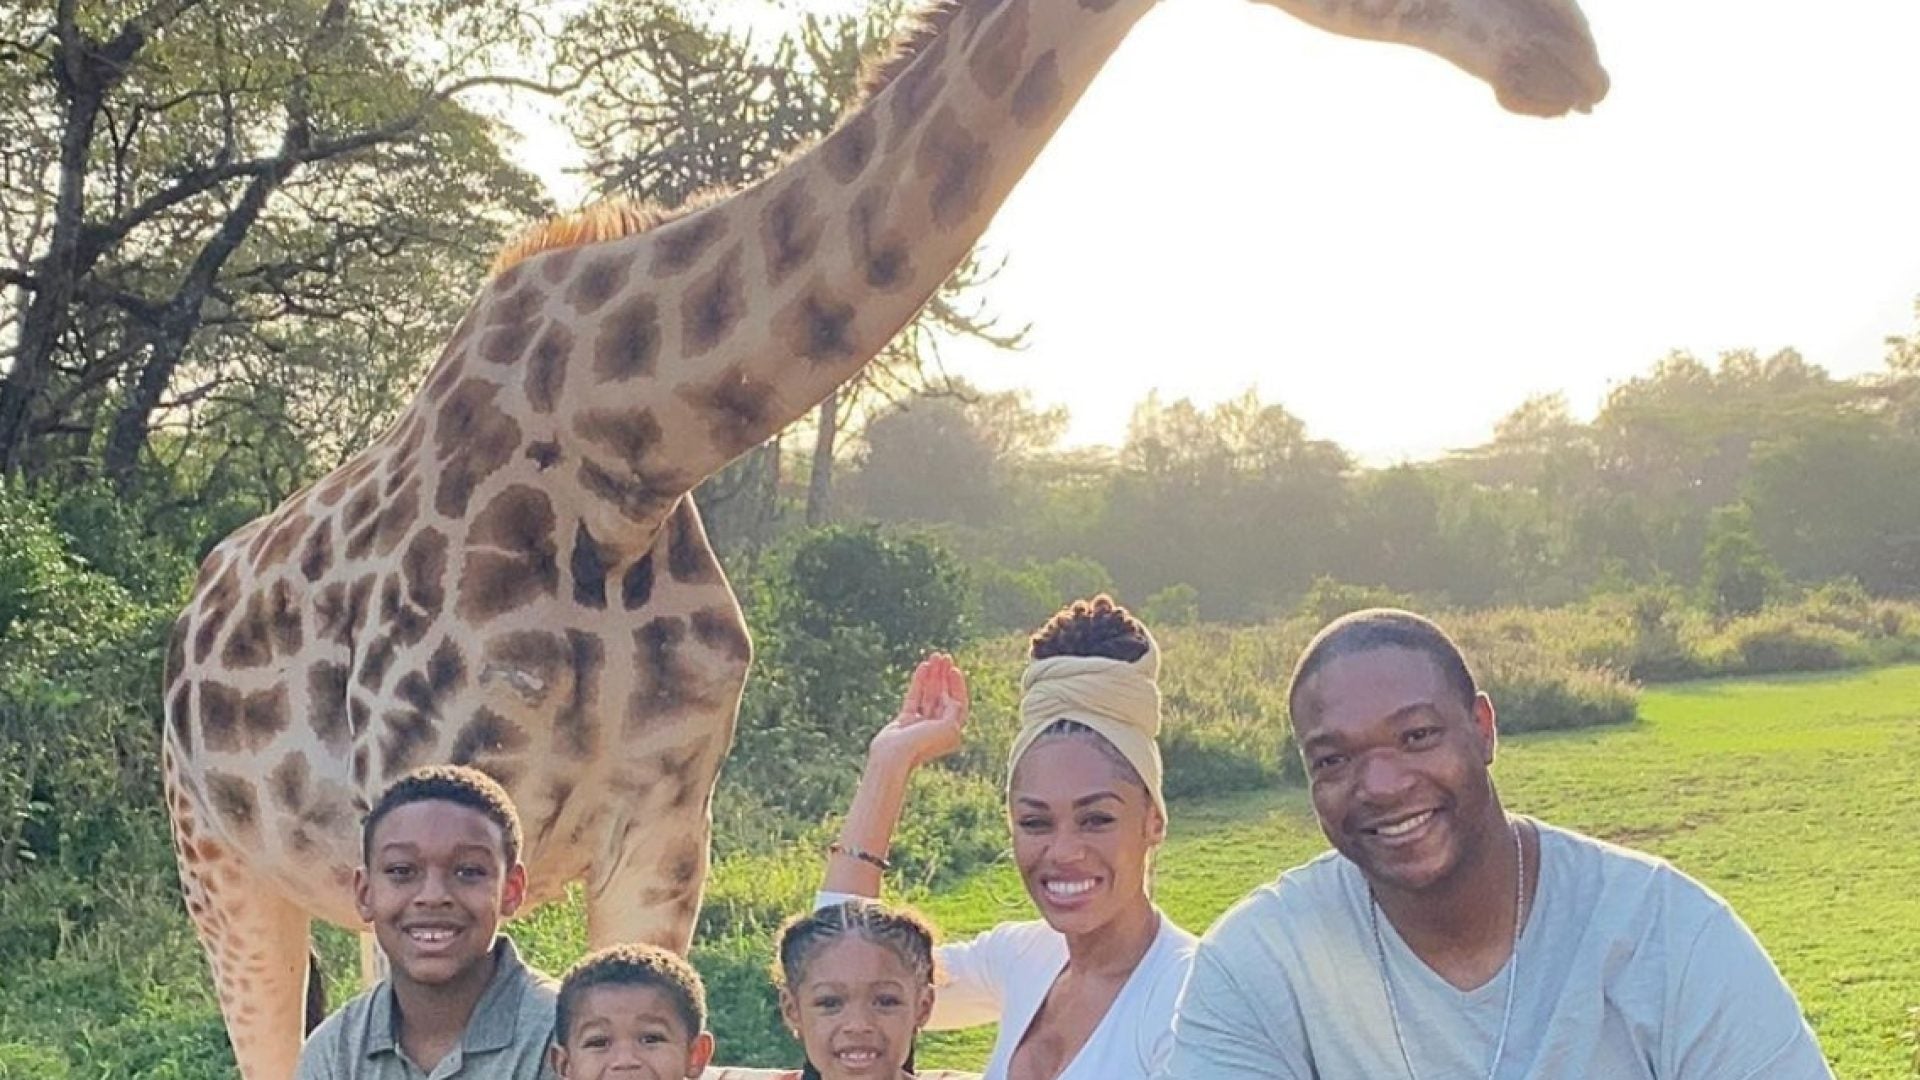 Monique Samuels Shares Picture-Perfect Family Photos In Kenya